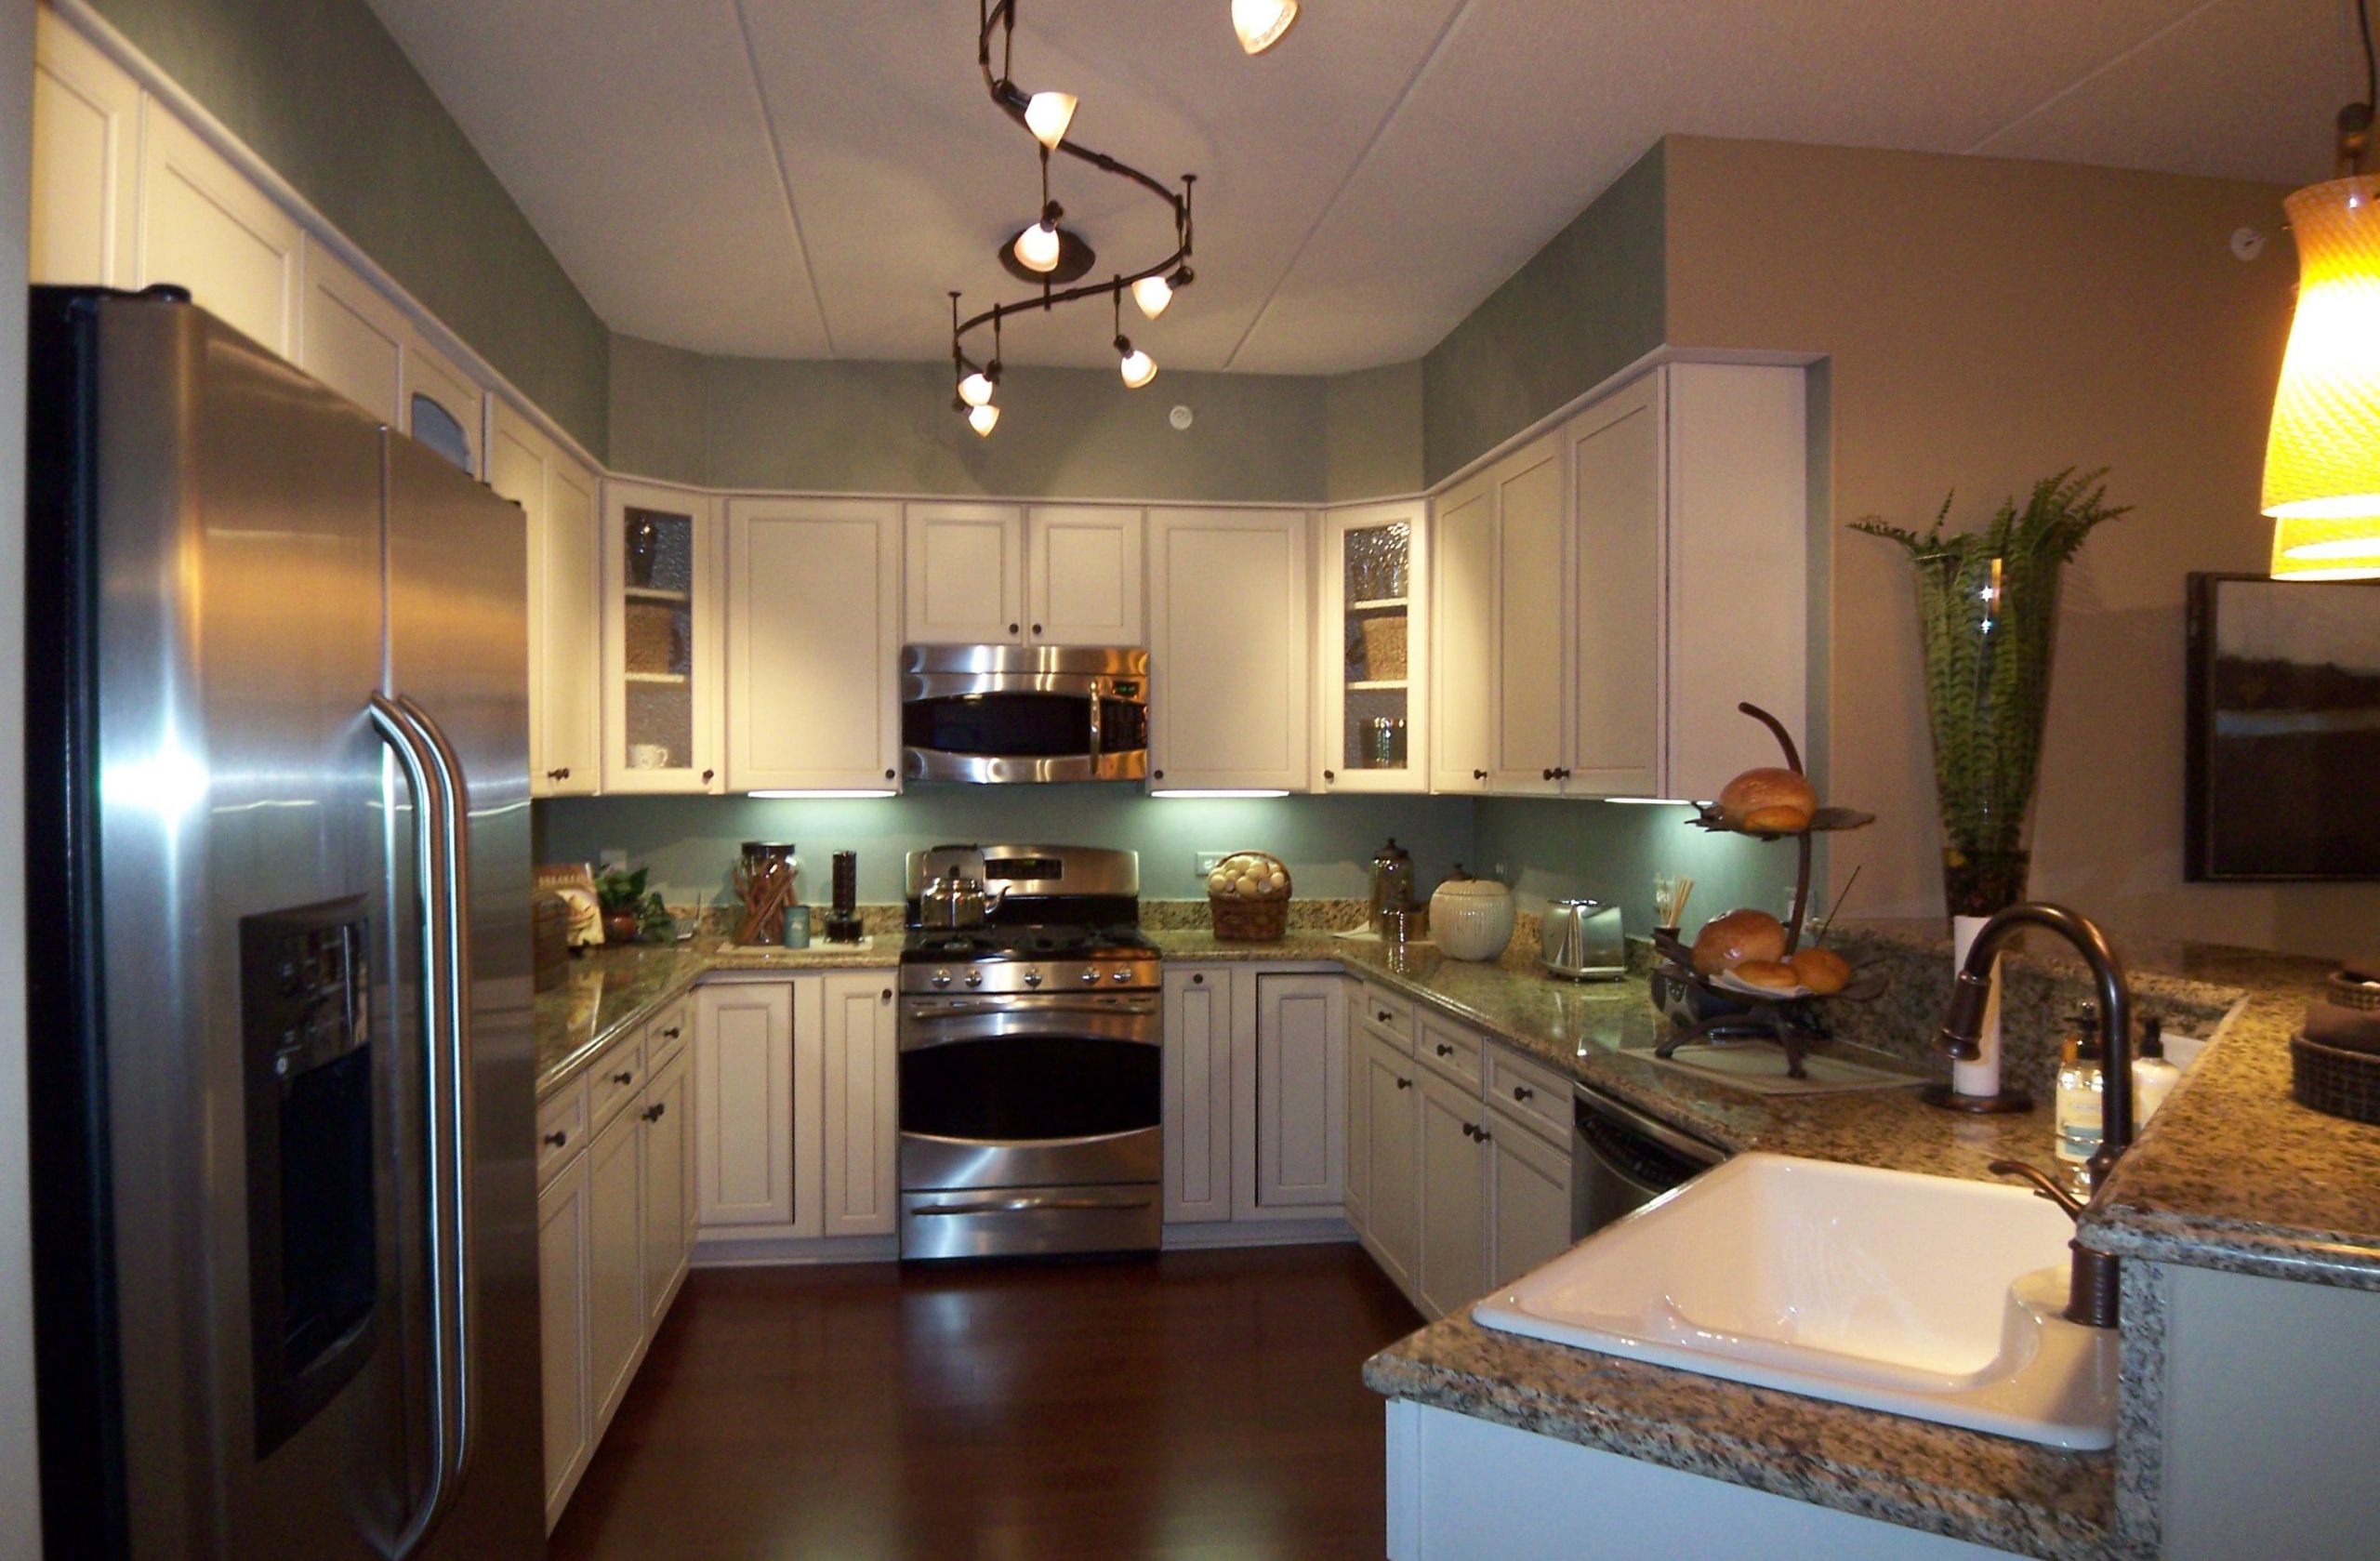 Kitchen Cabinets Lighting Ideas
 Kitchen Ceiling Lights Ideas to Enlighten Cooking Times